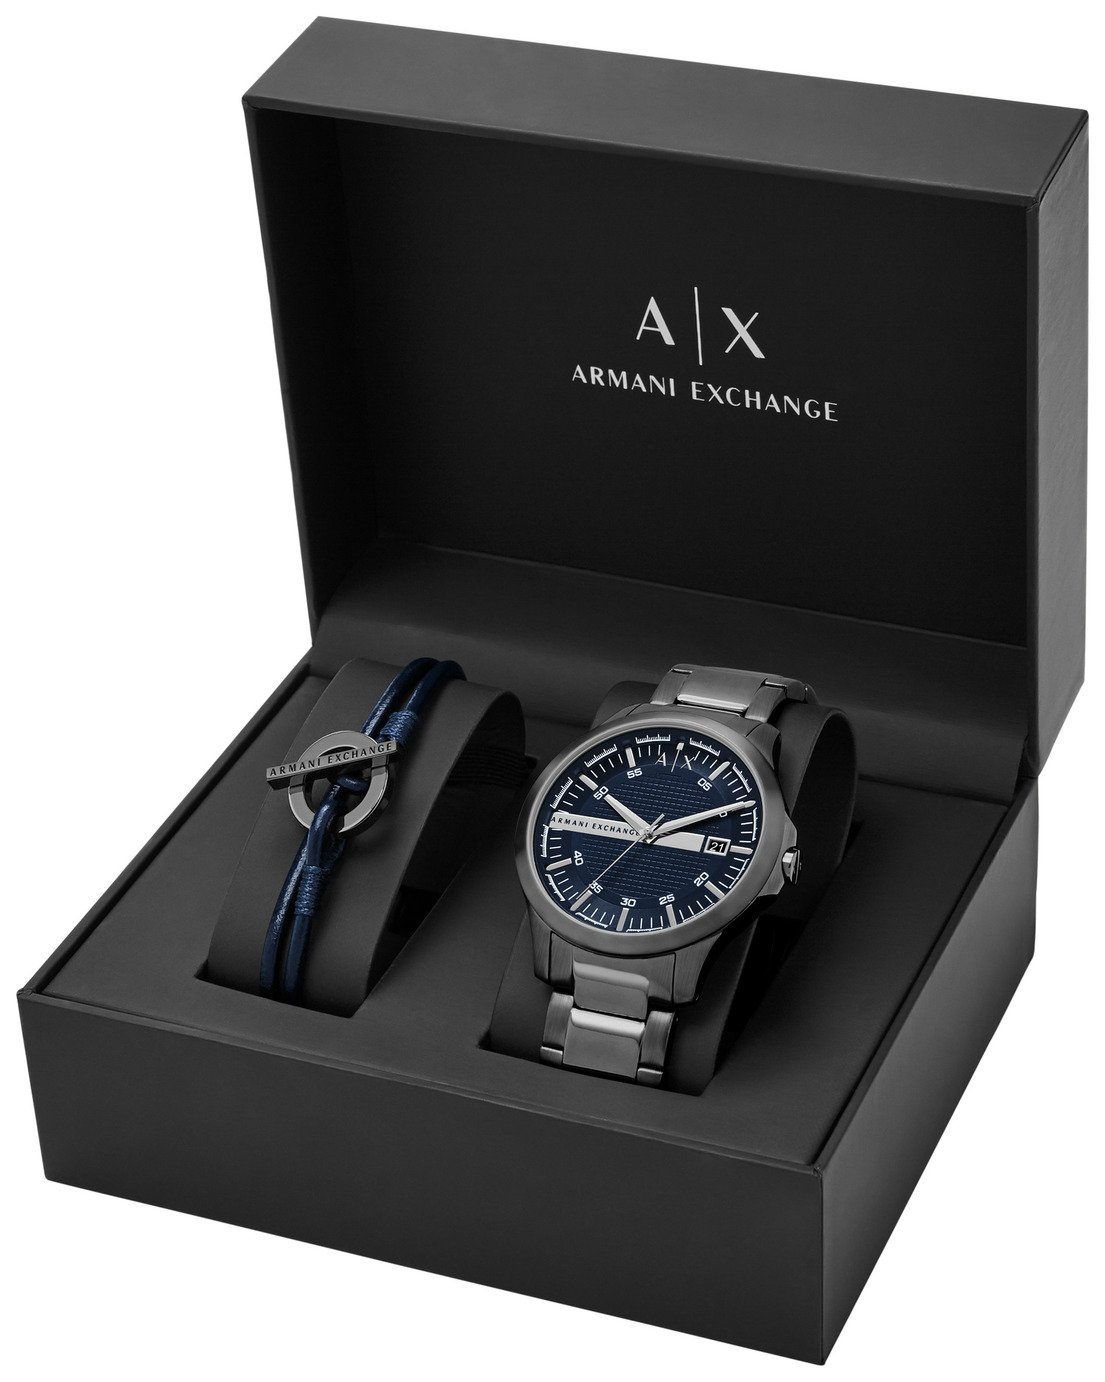 Armani Exchange Men's Silver Stainless Steel Watch Gift Set